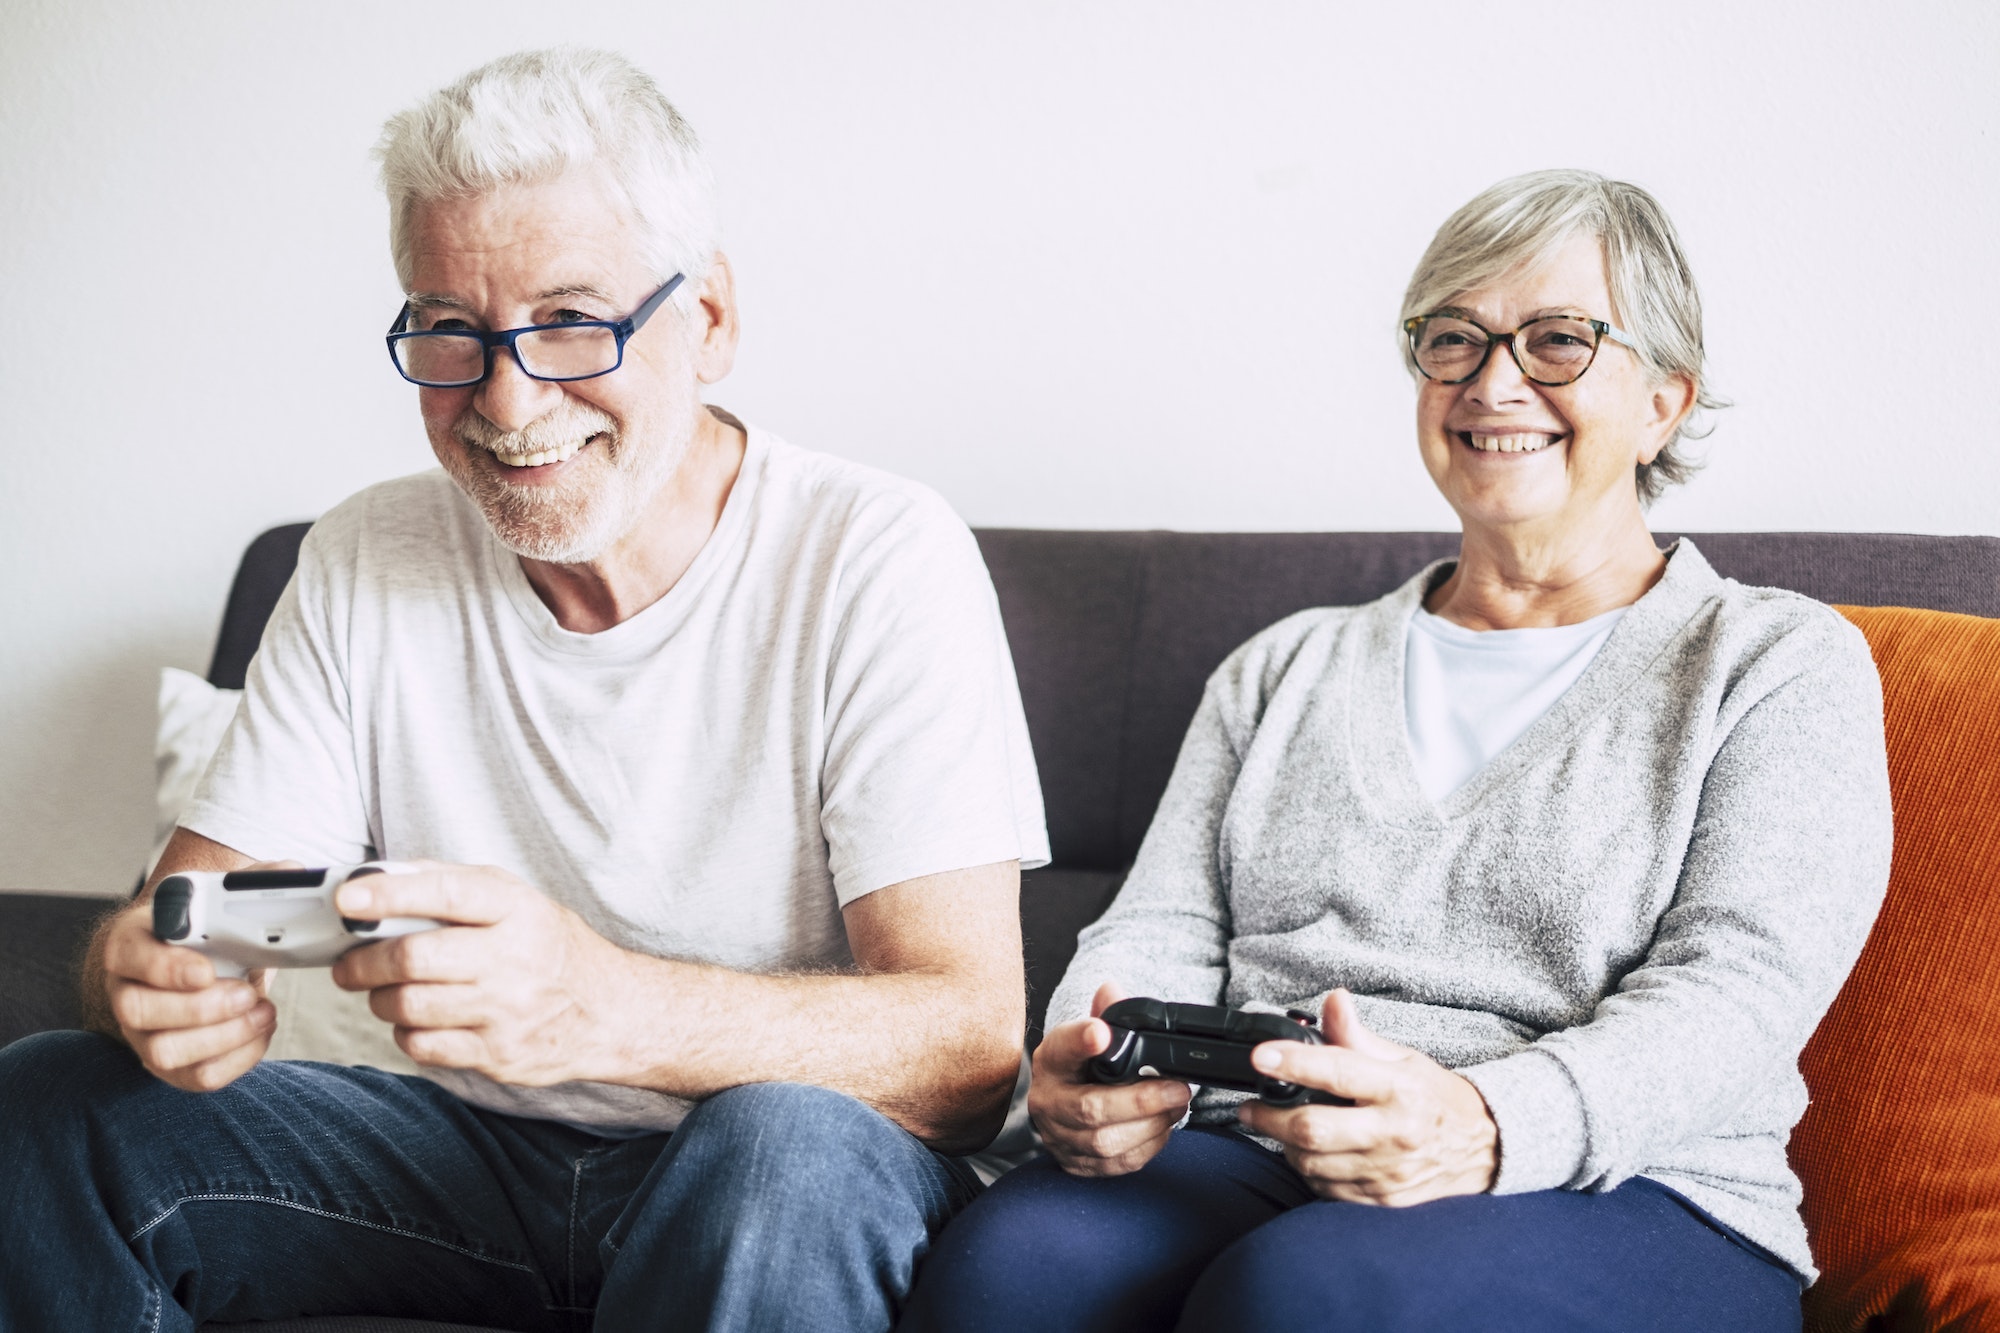 game apps for seniors with dementia